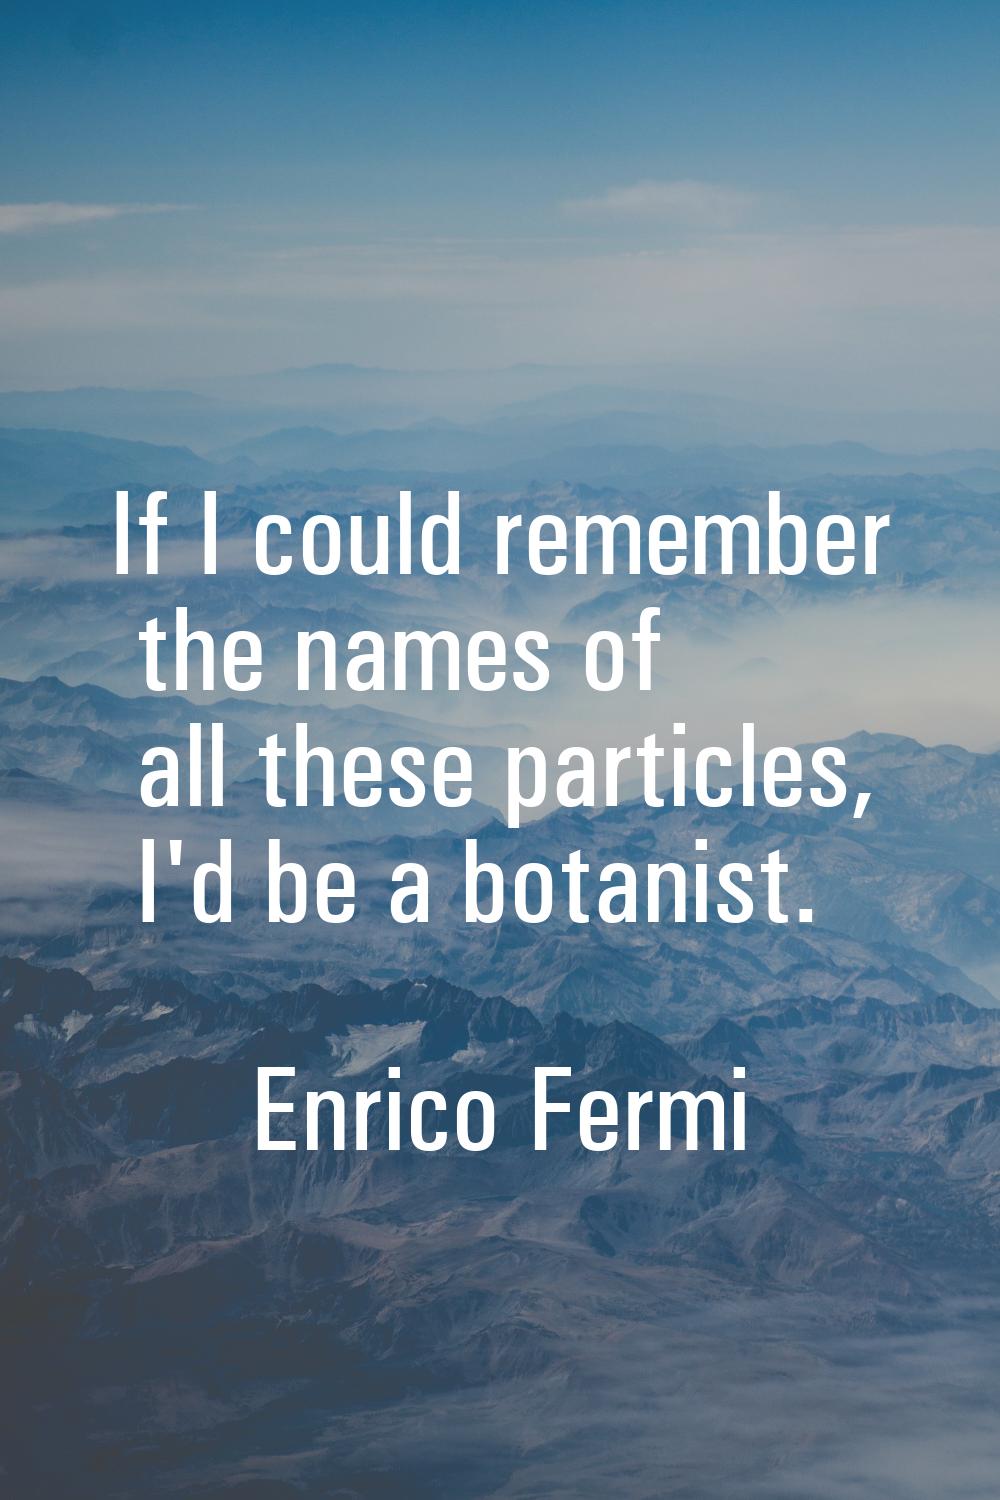 If I could remember the names of all these particles, I'd be a botanist.